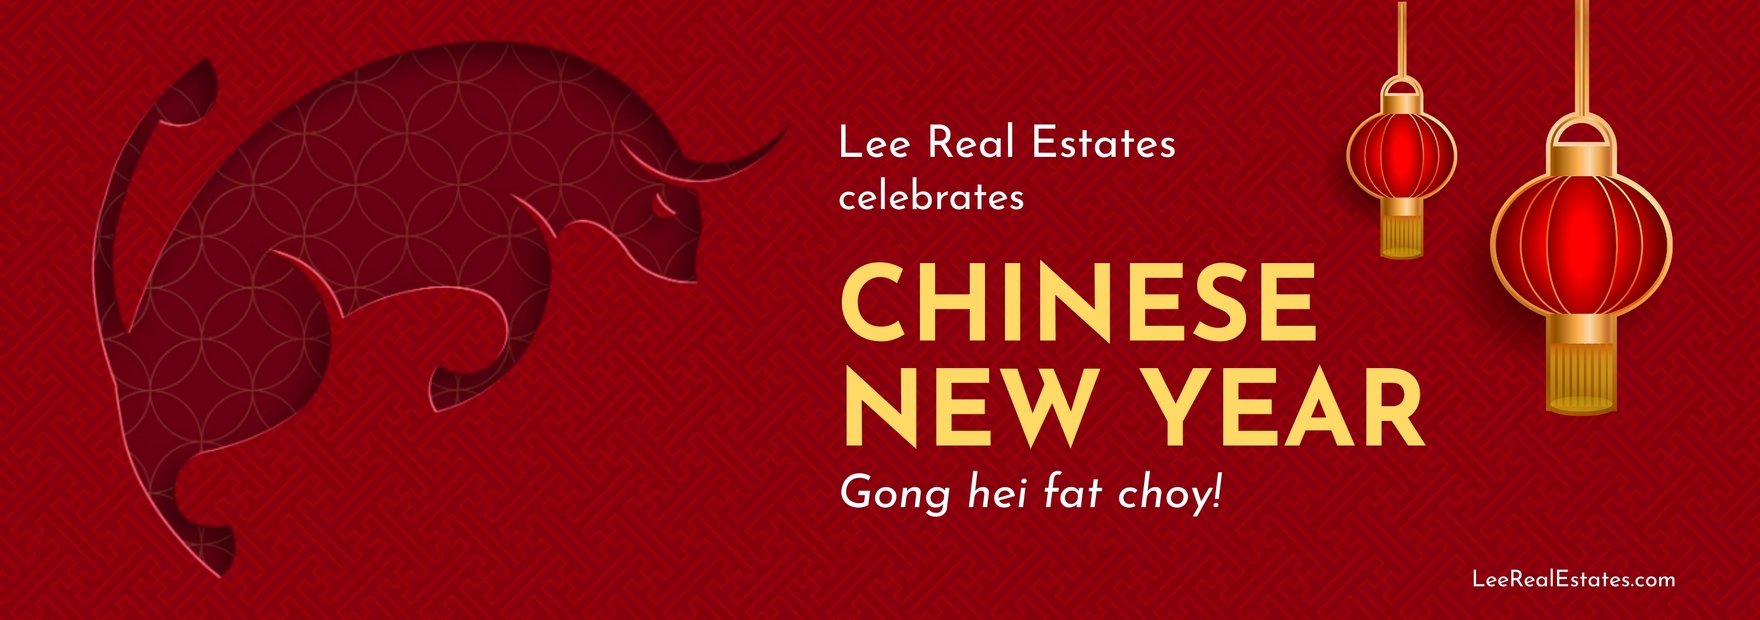 Chinese New Year Tumblr Banner Template